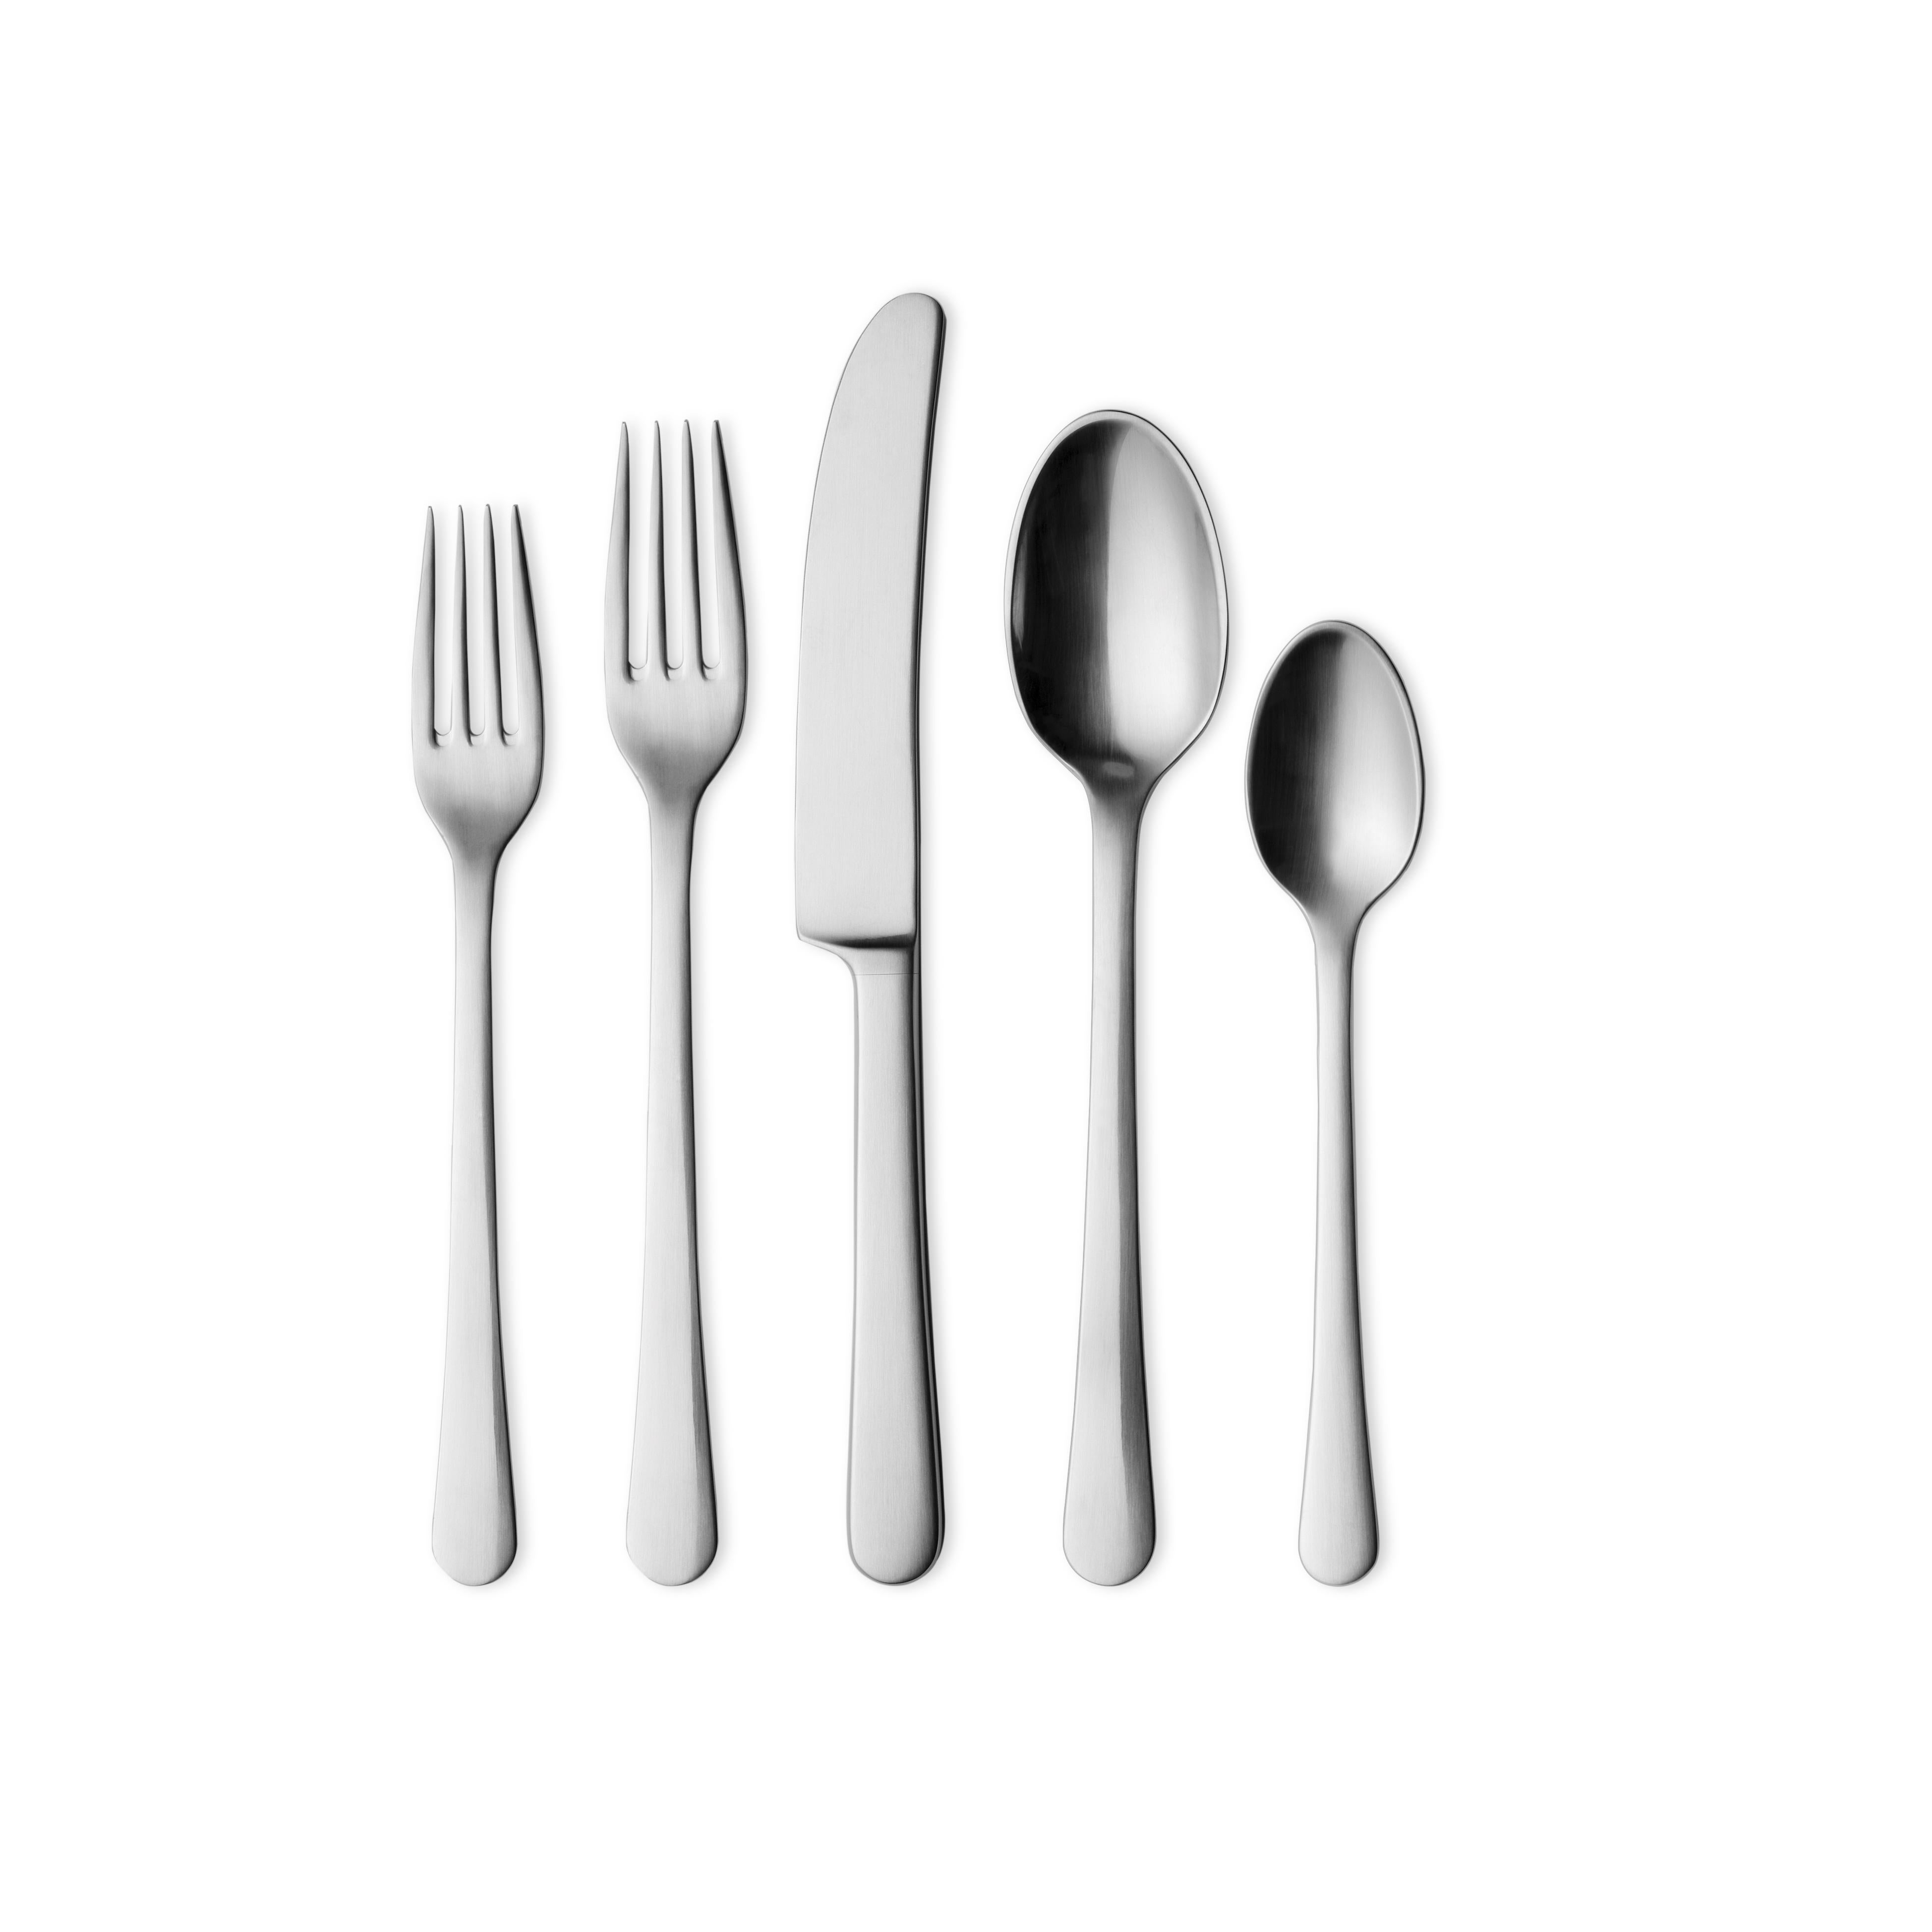 Matte stainless steel cutlery giftbox with: a dinner fork, long dinner knife, dessert spoon, starter fork and teaspoon.